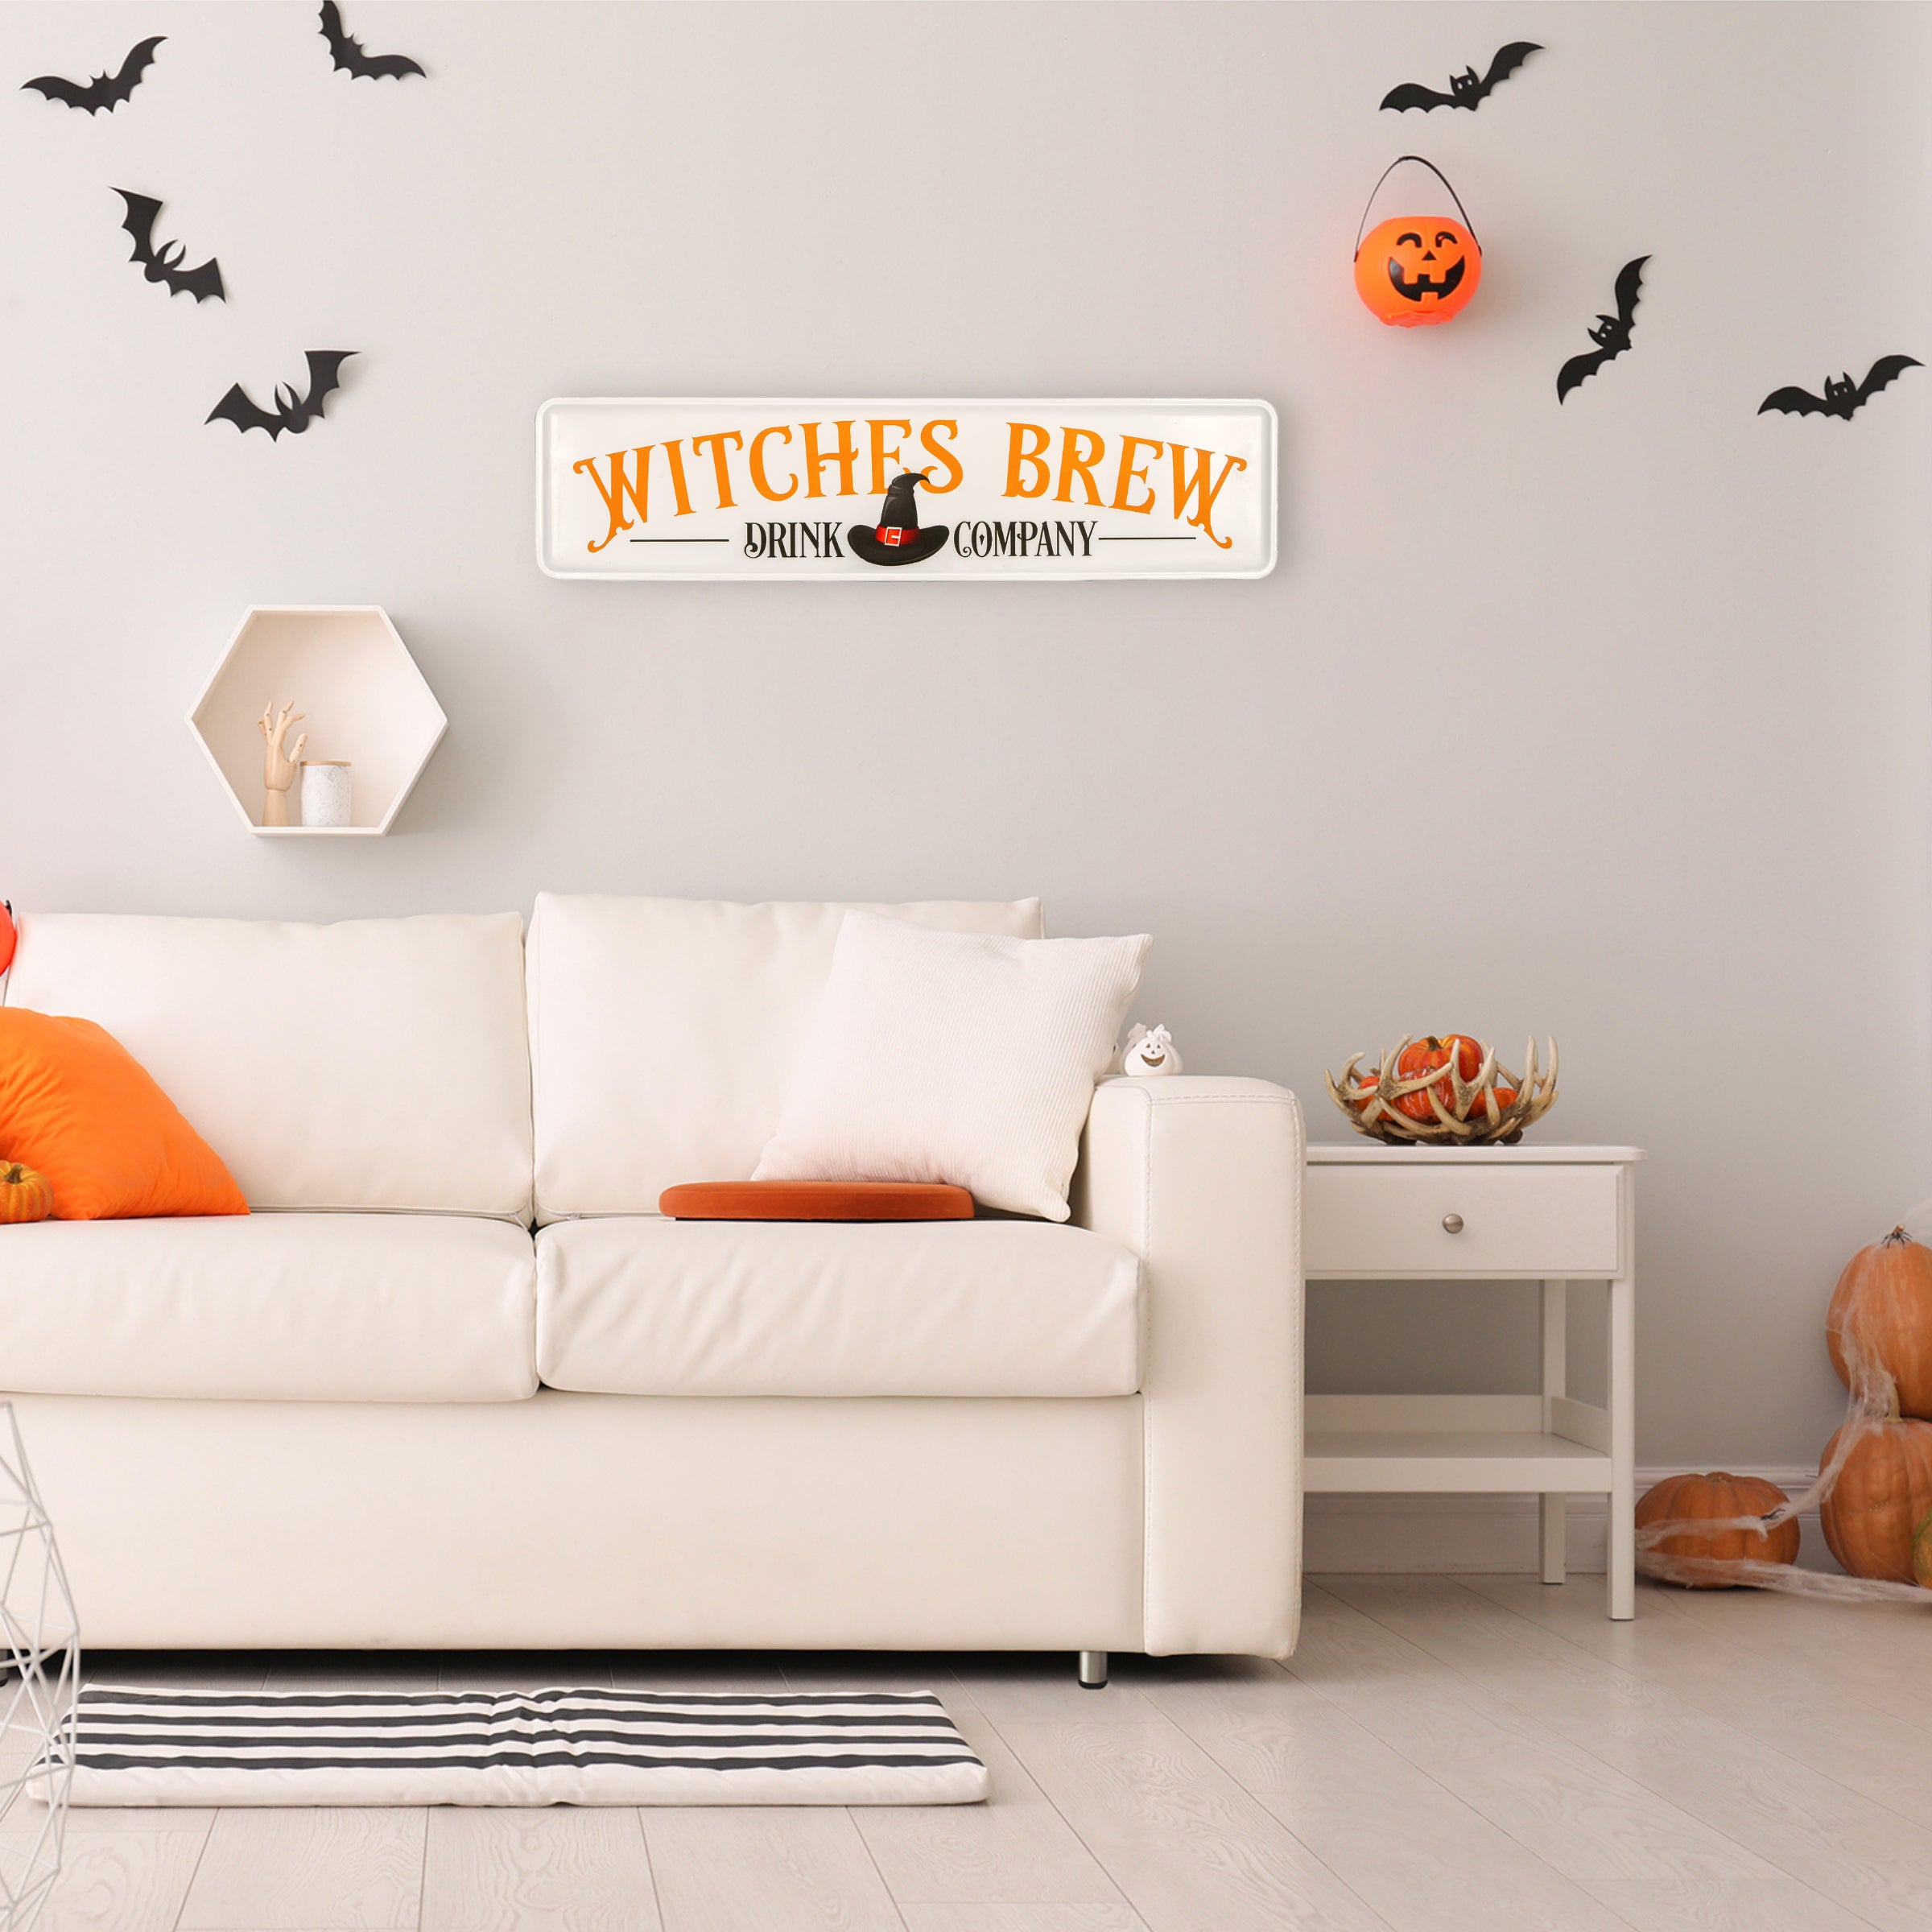 Halloween Hanging Wall Decoration, White, 'Witches Brew Drink Company', Metal Construction, 31 Inches